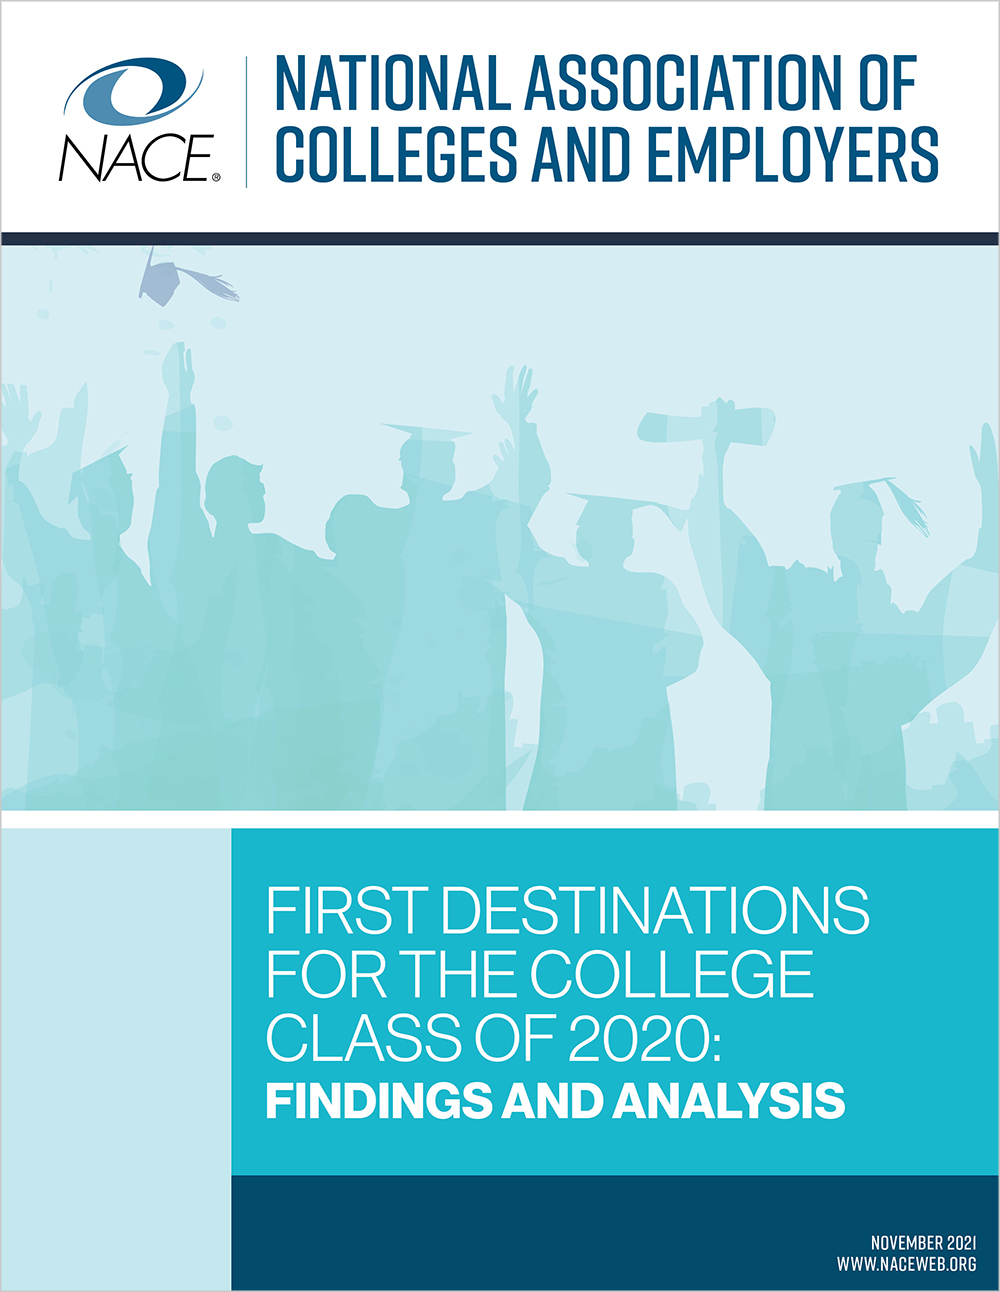 Download the printed report for the First Destinations for the College Class of 2020